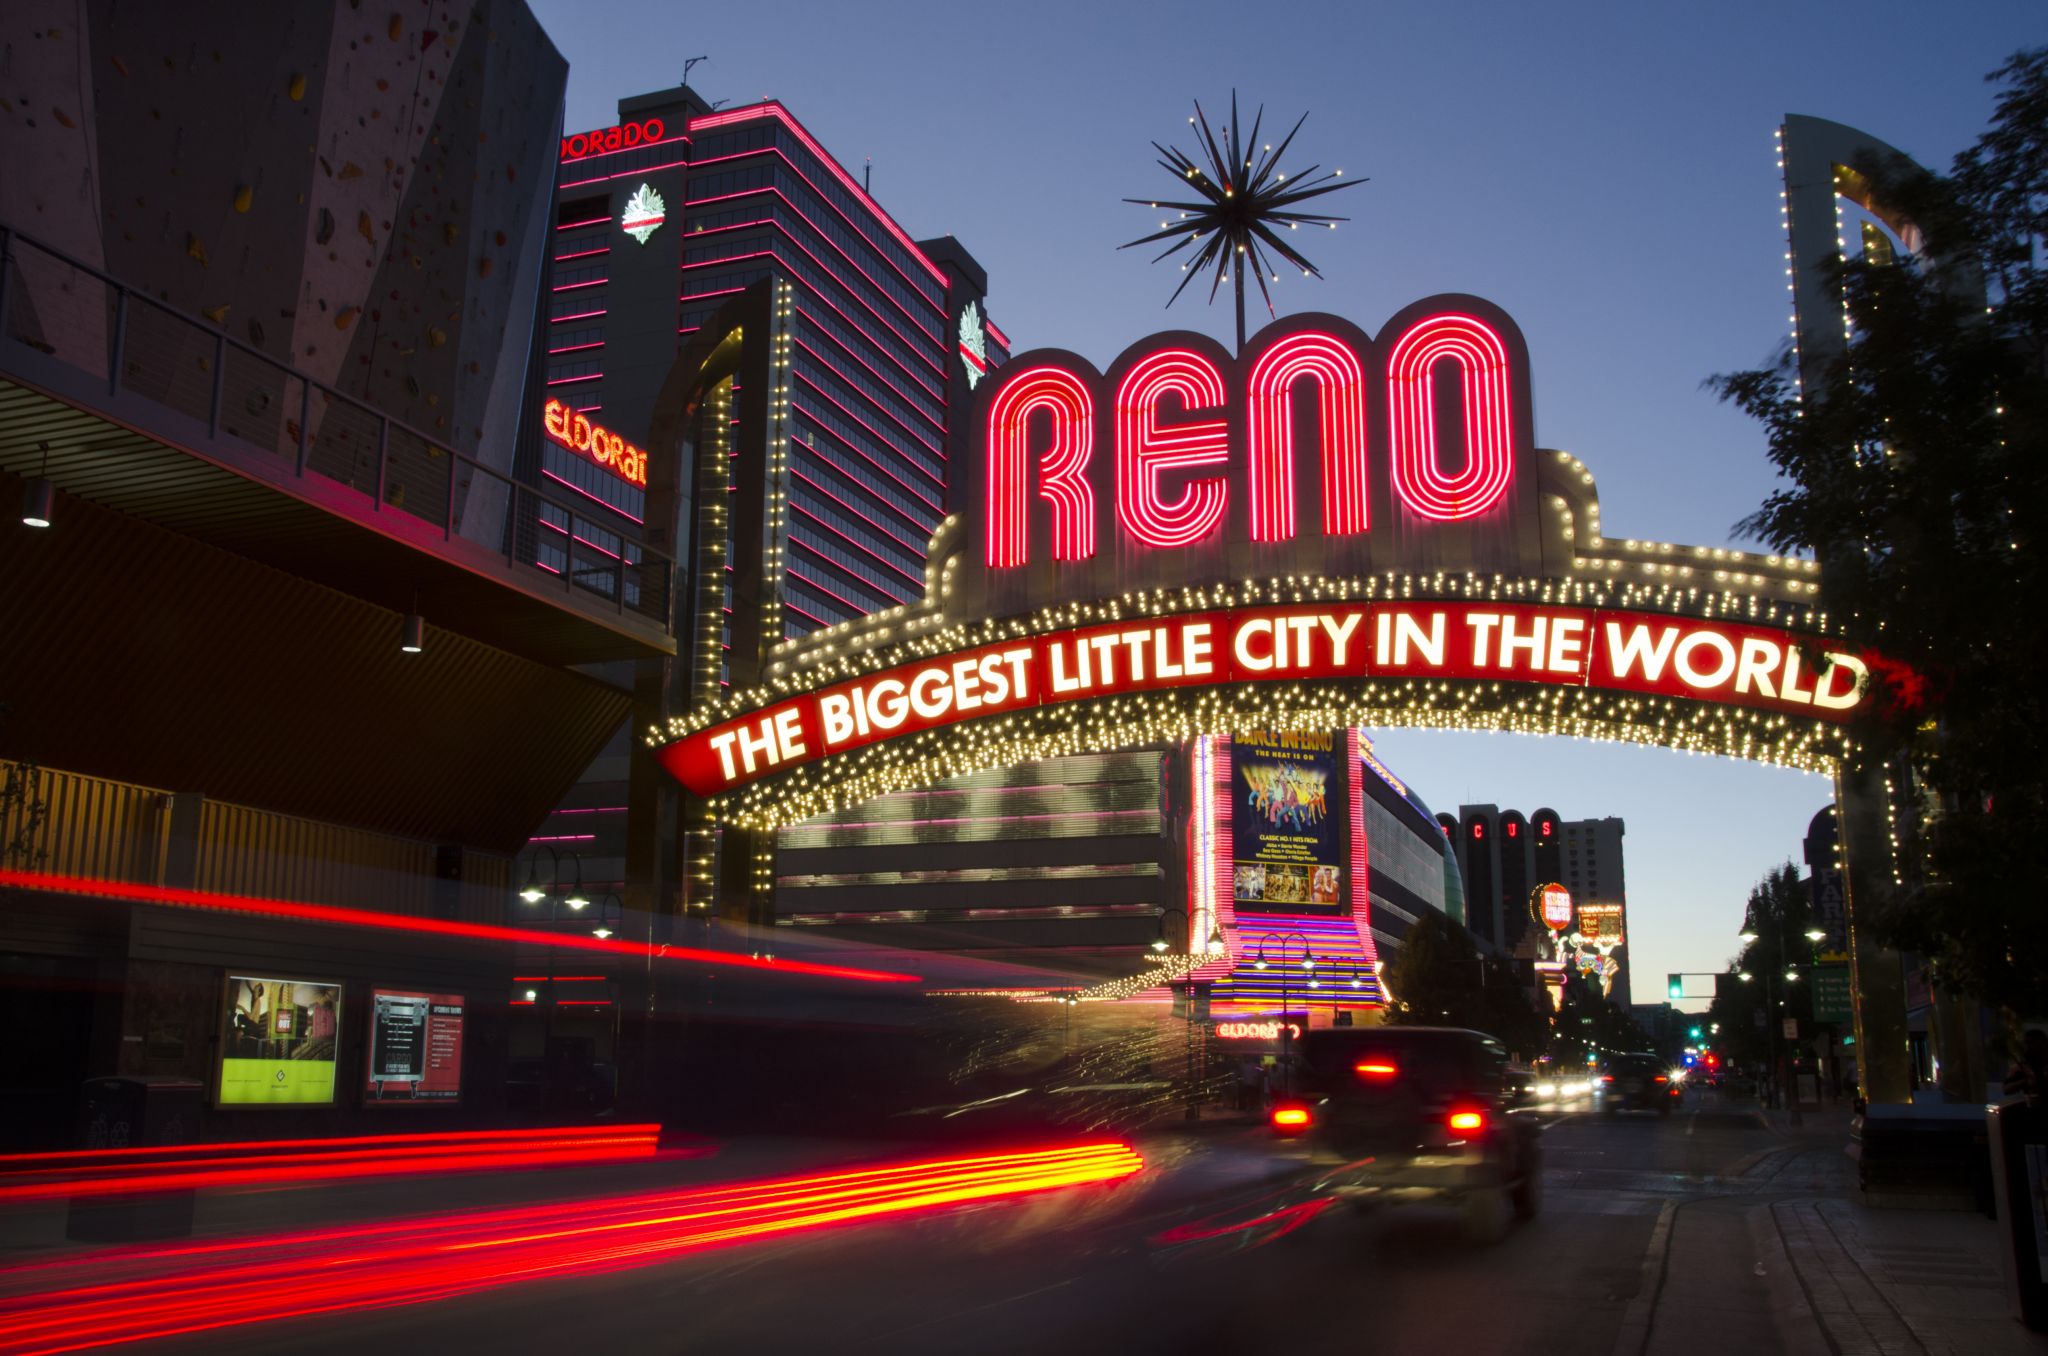 Is it safe to walk in reno at night?